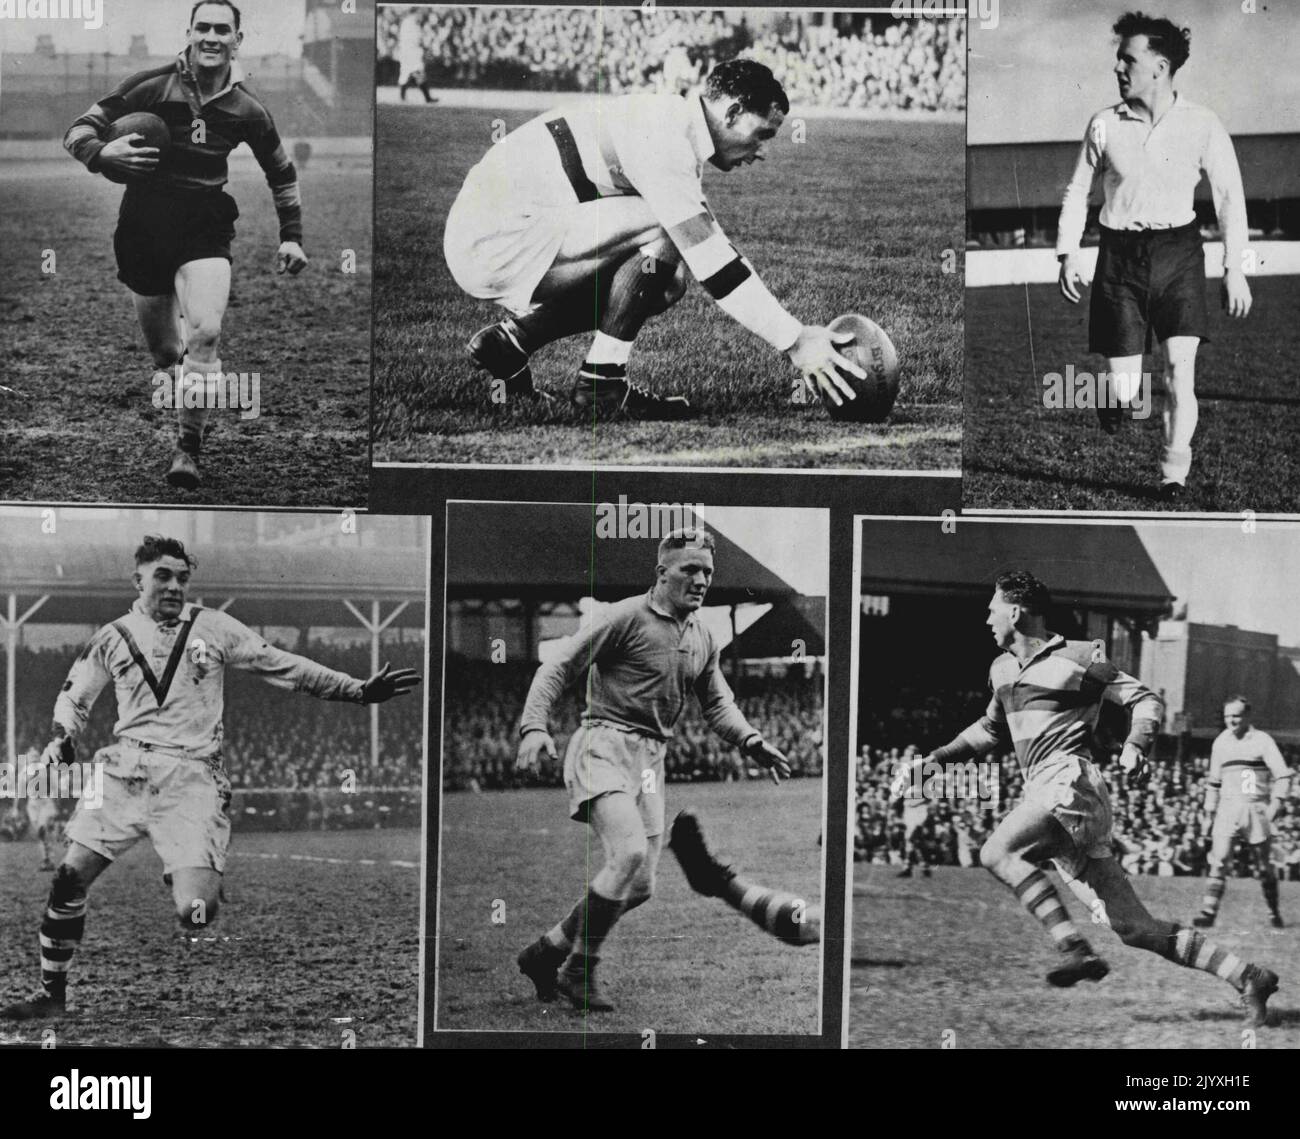 R. Williams (Leeds), E. Ward (Bradford Northern), D. Phillips (Belle Vue), E.J. Ashcroft (Wigan), J. Featherstone (Warrington), F. Higgins (Widnes). England Rugby players for Australian from Provincial Press Agency 80 ***** street Southport Lancs. England. June 27, 1950. (Photo by Provincial Press Agency). Stock Photo